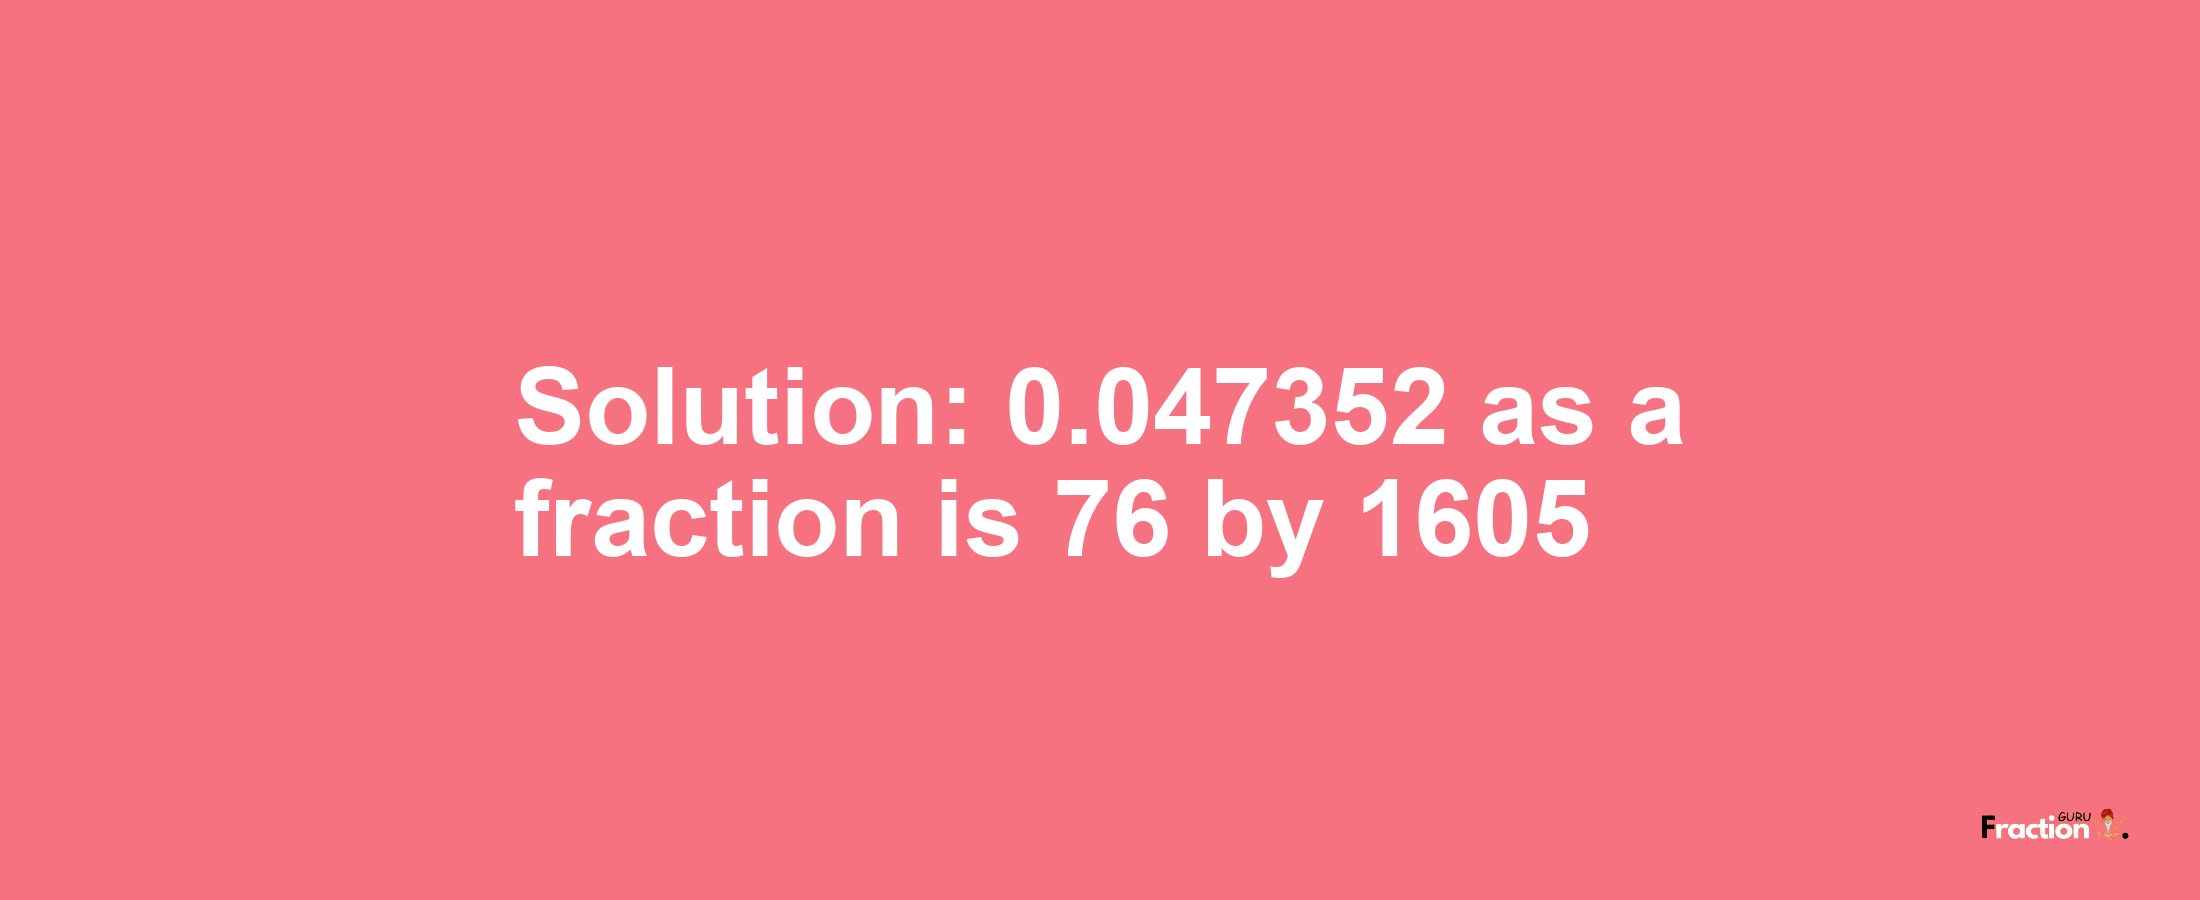 Solution:0.047352 as a fraction is 76/1605